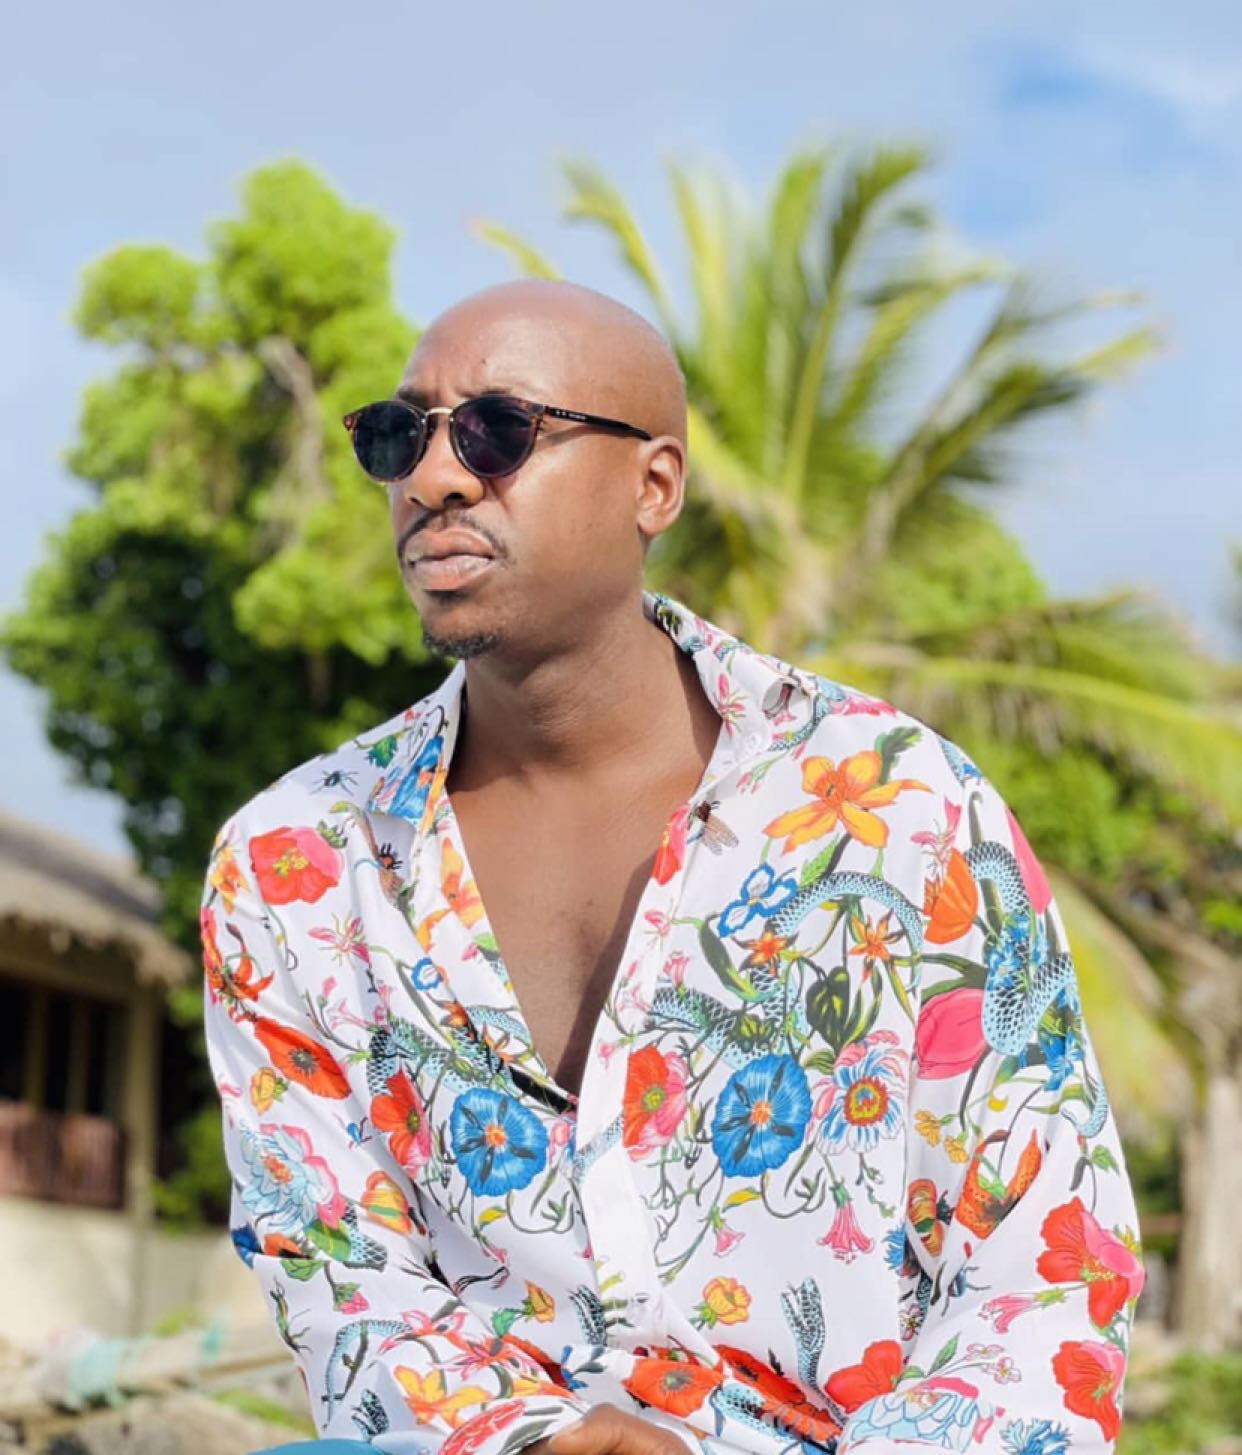 Sauti Sol’s Bien Confirms Nviiri The Storyteller Is Taking Therapy Sessions ‘Seriously’ 